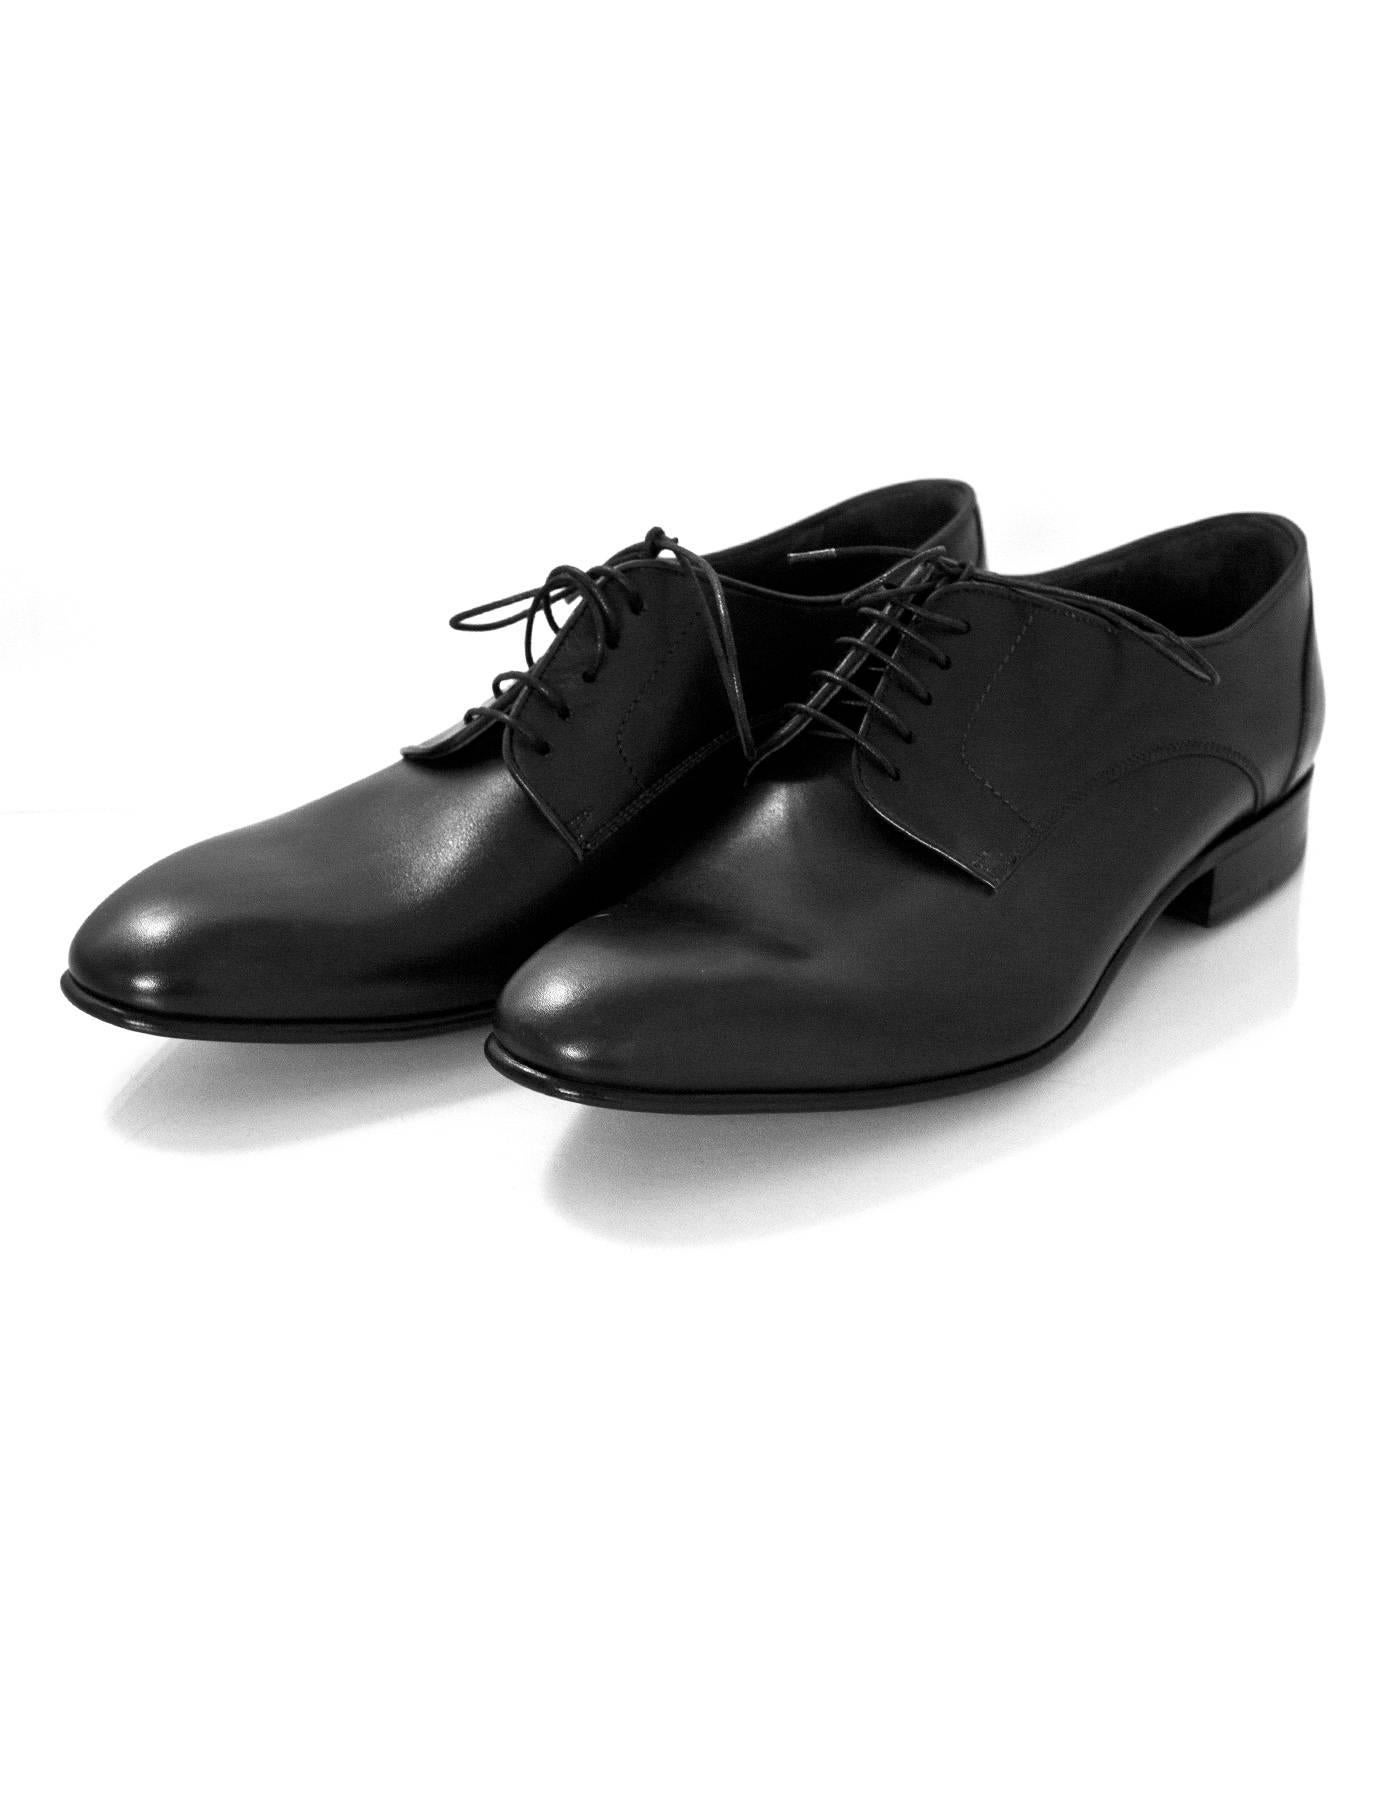 Lanvin Men's Black Leather Shoes Sz 8 NIB

Made In: Italy
Color: Black
Materials: Leather
Closure/Opening: Lace tie closure
Sole Stamp: Lanvin
Overall Condition: Excellent pre-owned condition
Included: Lanvin box, dust bags, extra laces

Marked